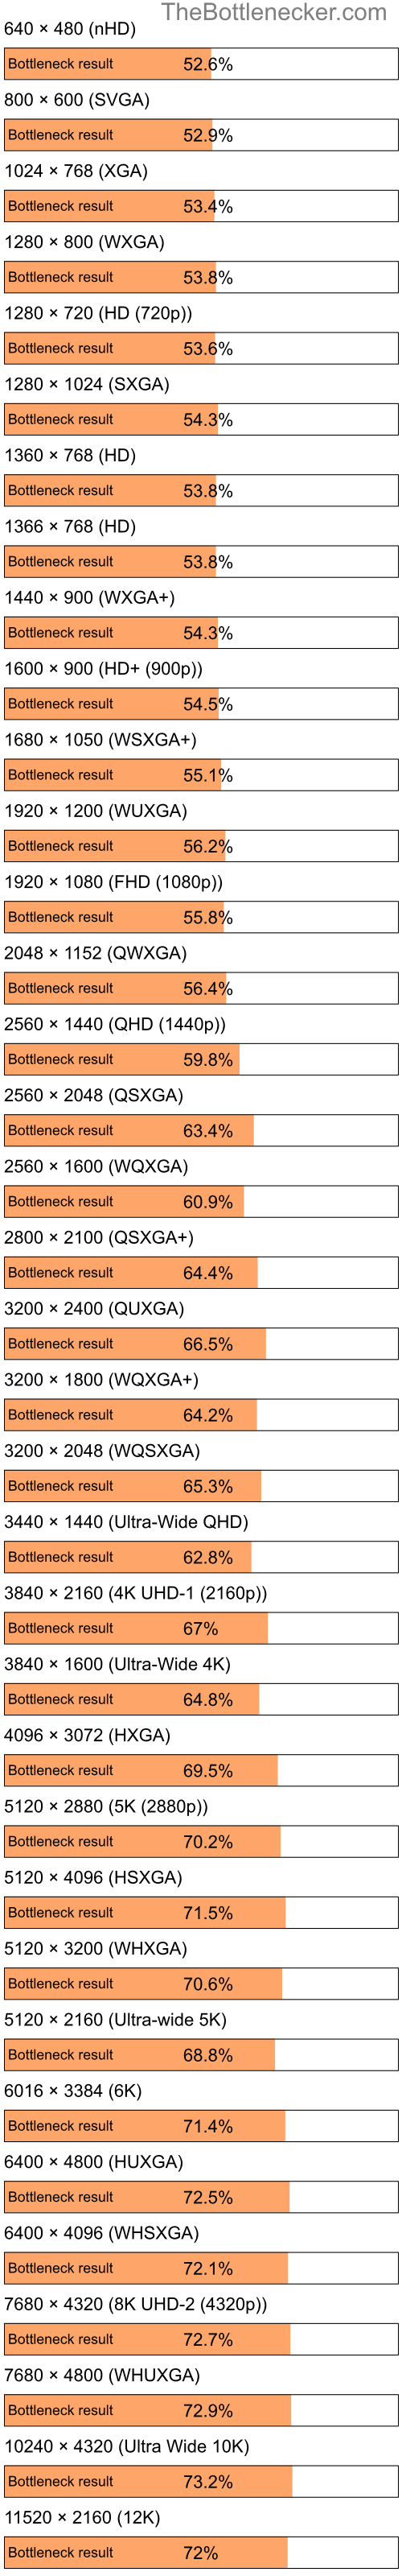 Bottleneck results by resolution for Intel Pentium 4 and Intel G45 in Processor Intense Tasks